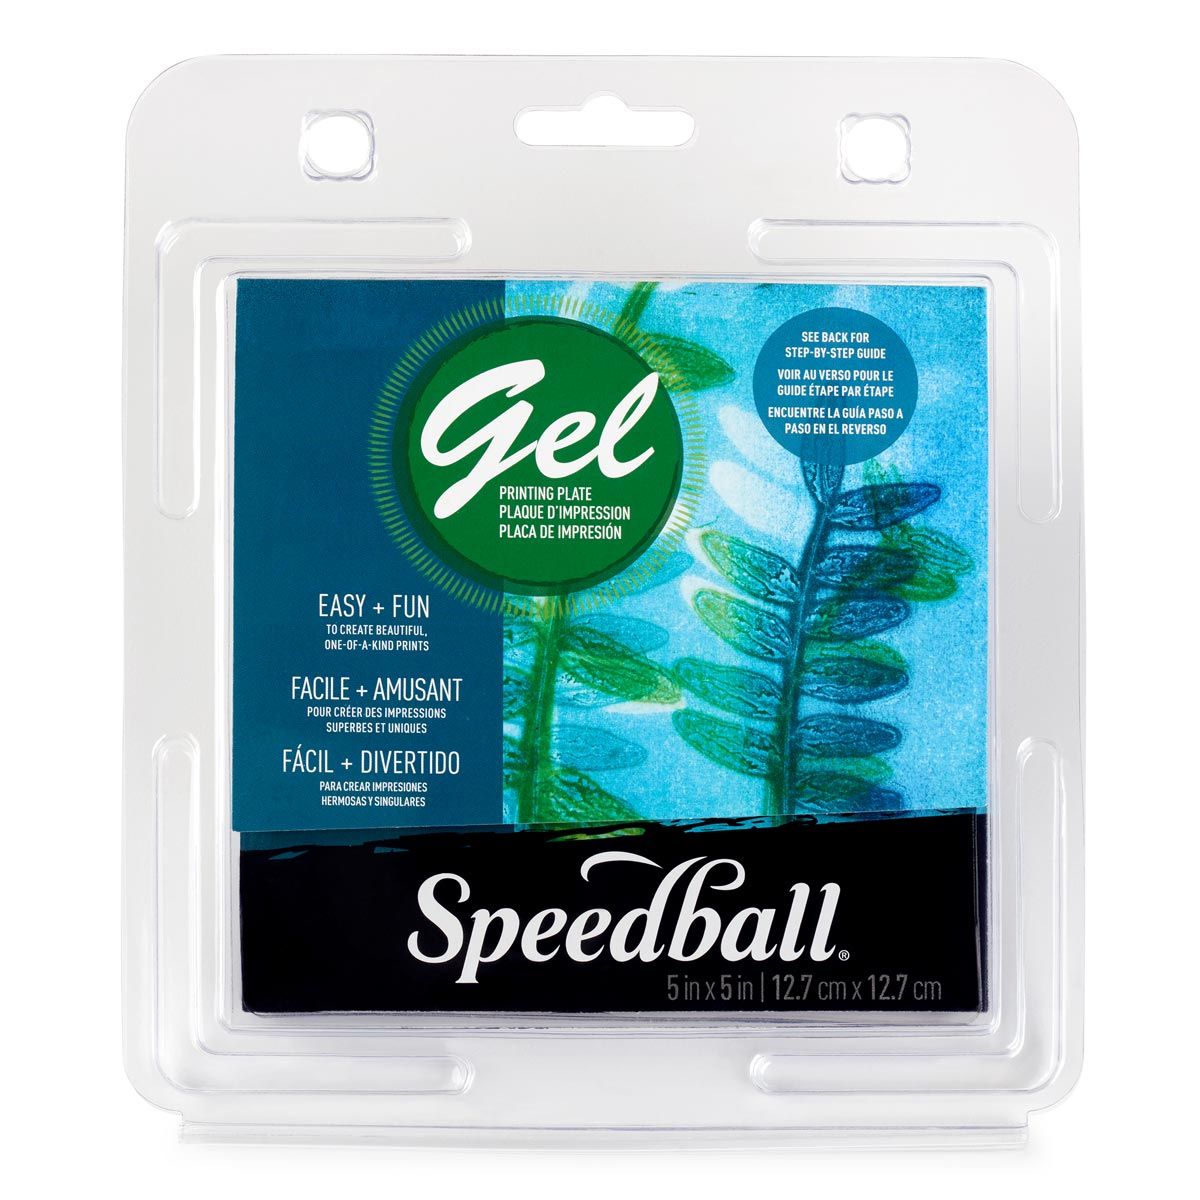 Speedball Gel Printing Plate 5 x 5 Inches